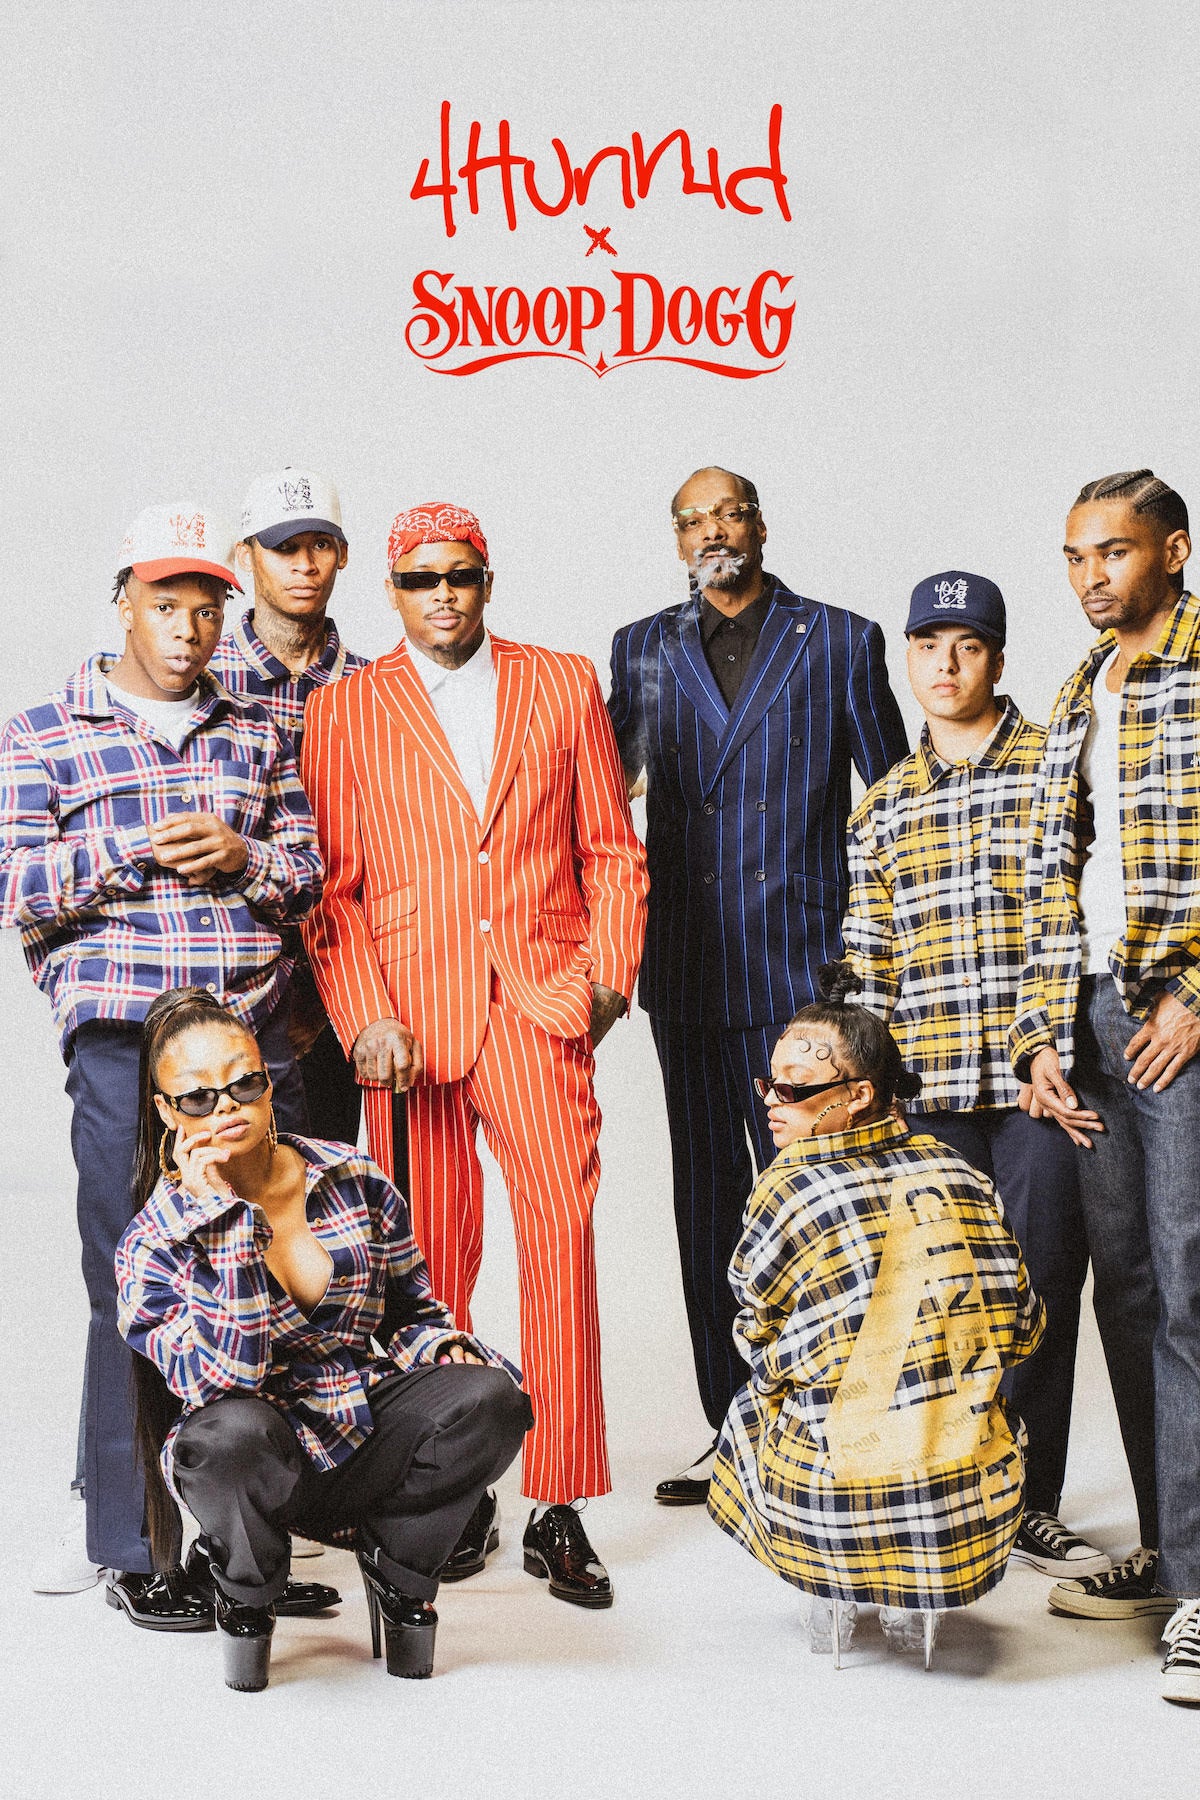 SNOOP DOGG & 4HUNNID TEAM UP FOR COLLABORATIVE 